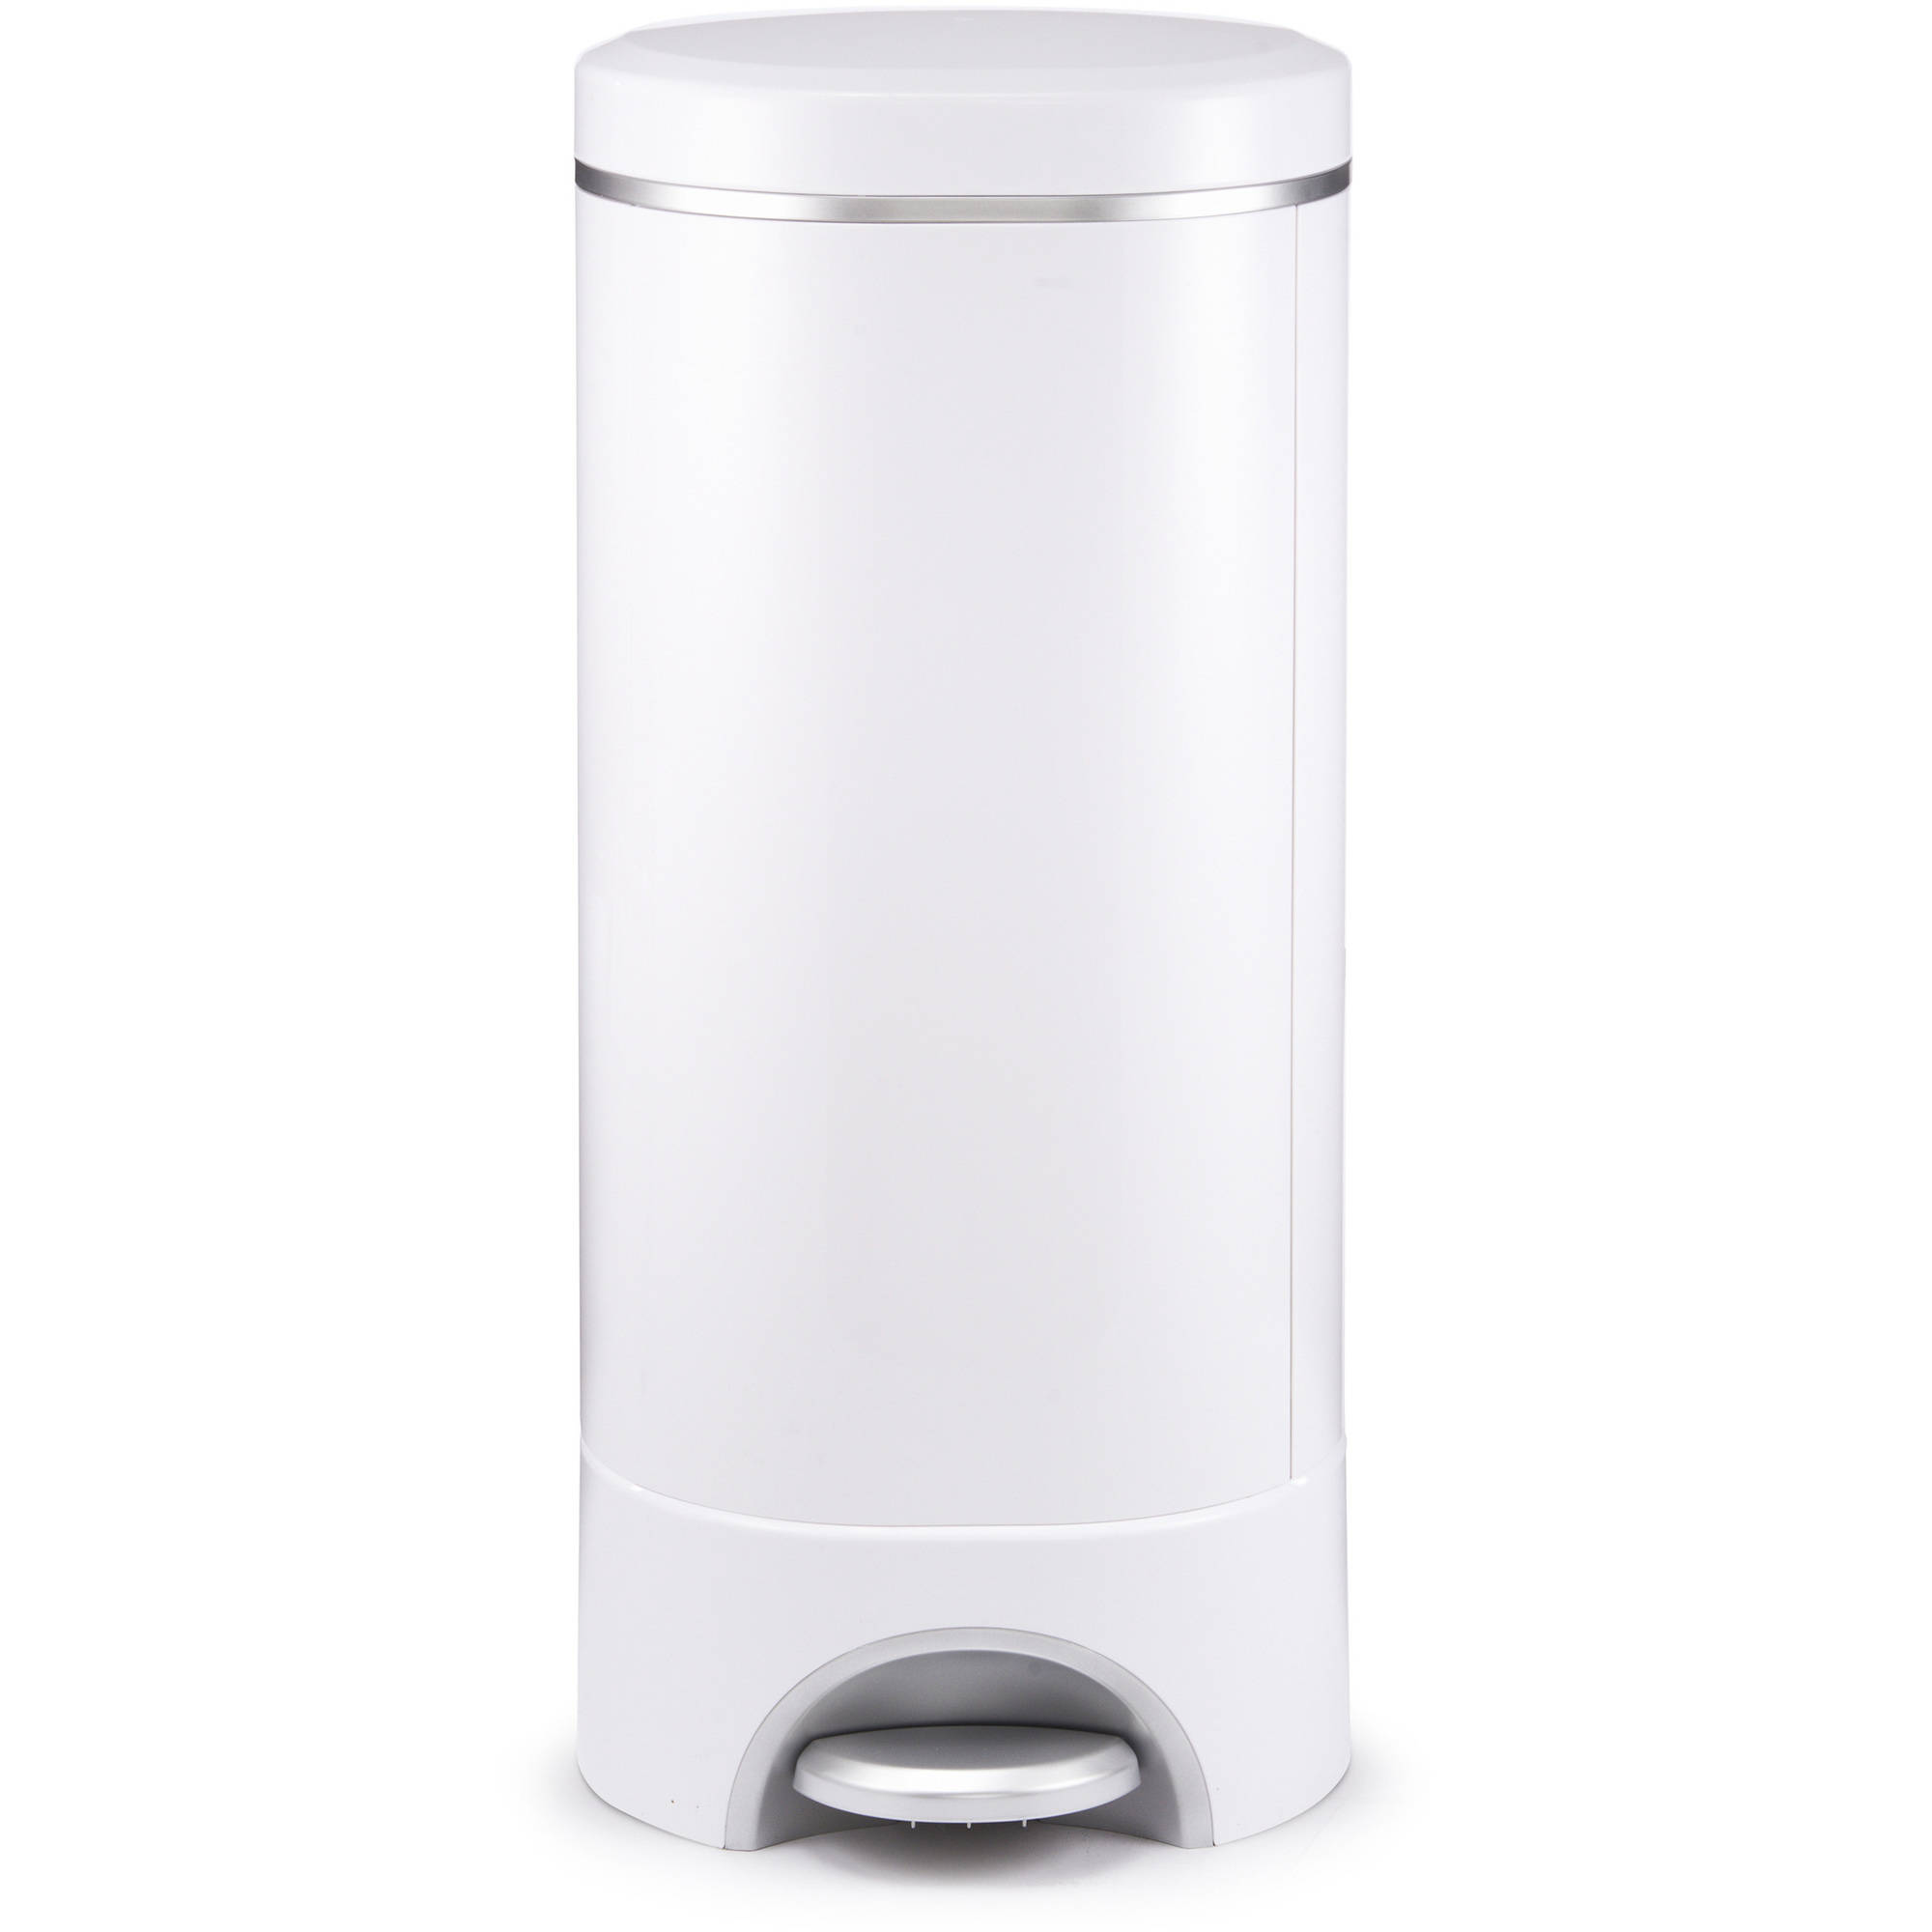 Munchkin® STEP™ Baby Diaper Pail, Powered by Arm & Hammer™, White - image 1 of 14